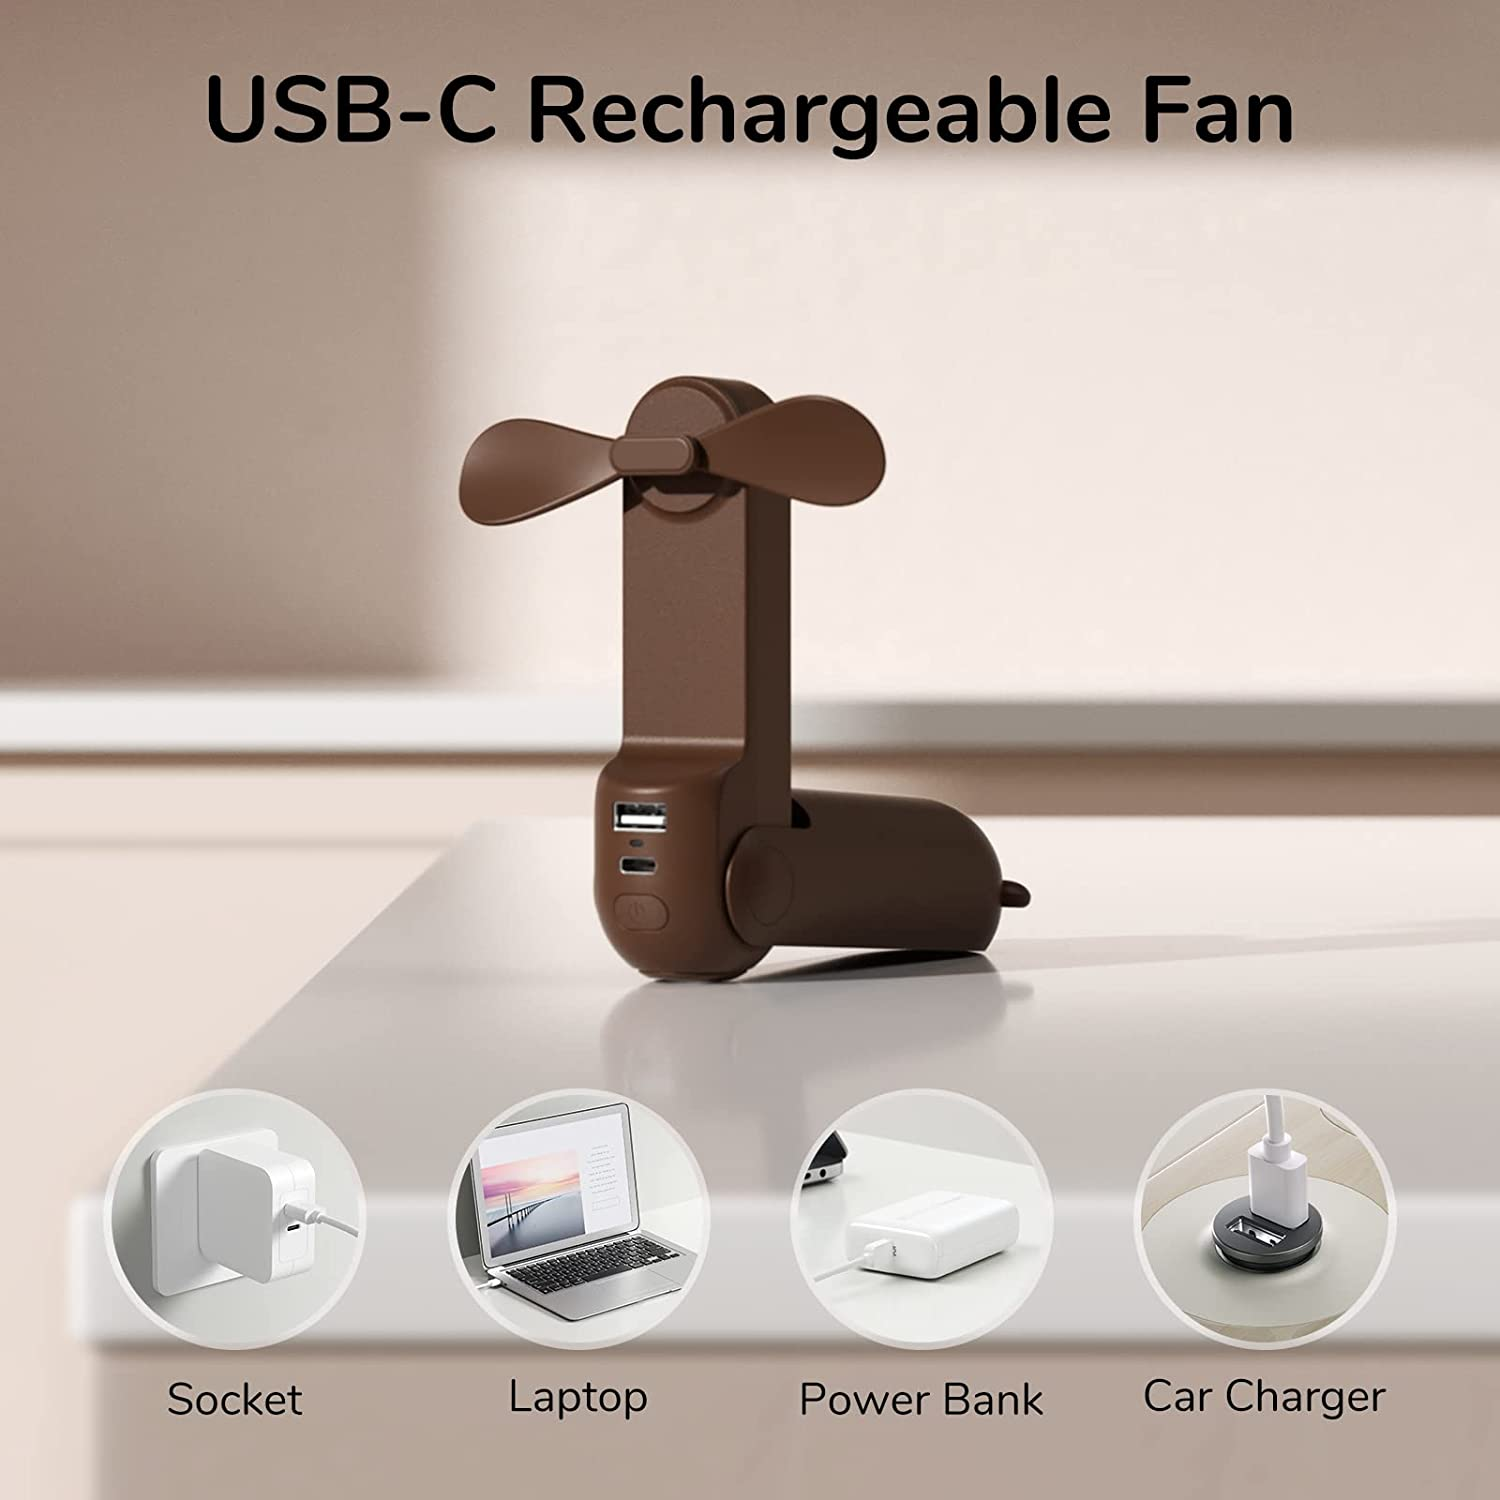 Handheld Mini Fan, 3 in 1 Hand Fan, Portable USB Rechargeable Small Pocket Fan, Battery Operated Fan [14-21 Working Hours] with Power Bank, Flashlight Feature for Women,Travel,Outdoor-Brown